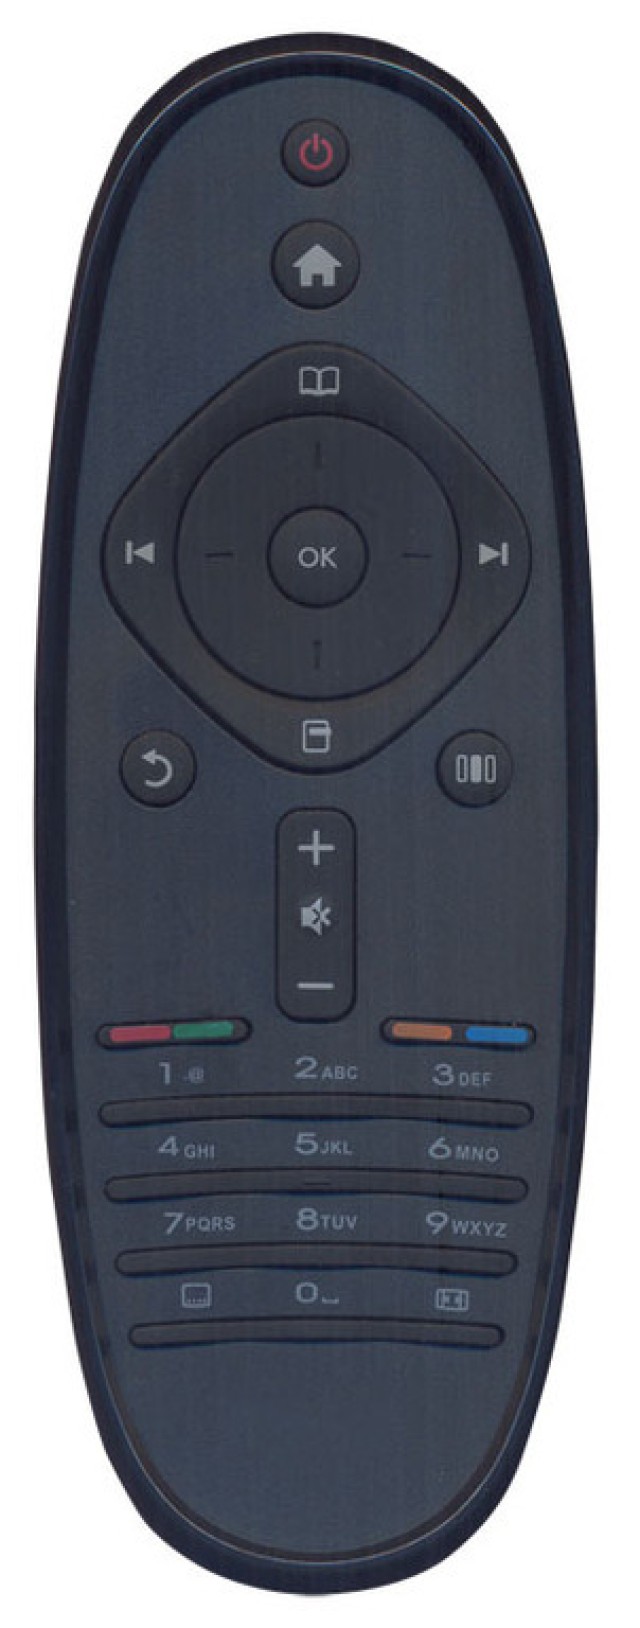 OEM, 0127, Remote control compatible with PHILIPS LED / LCD